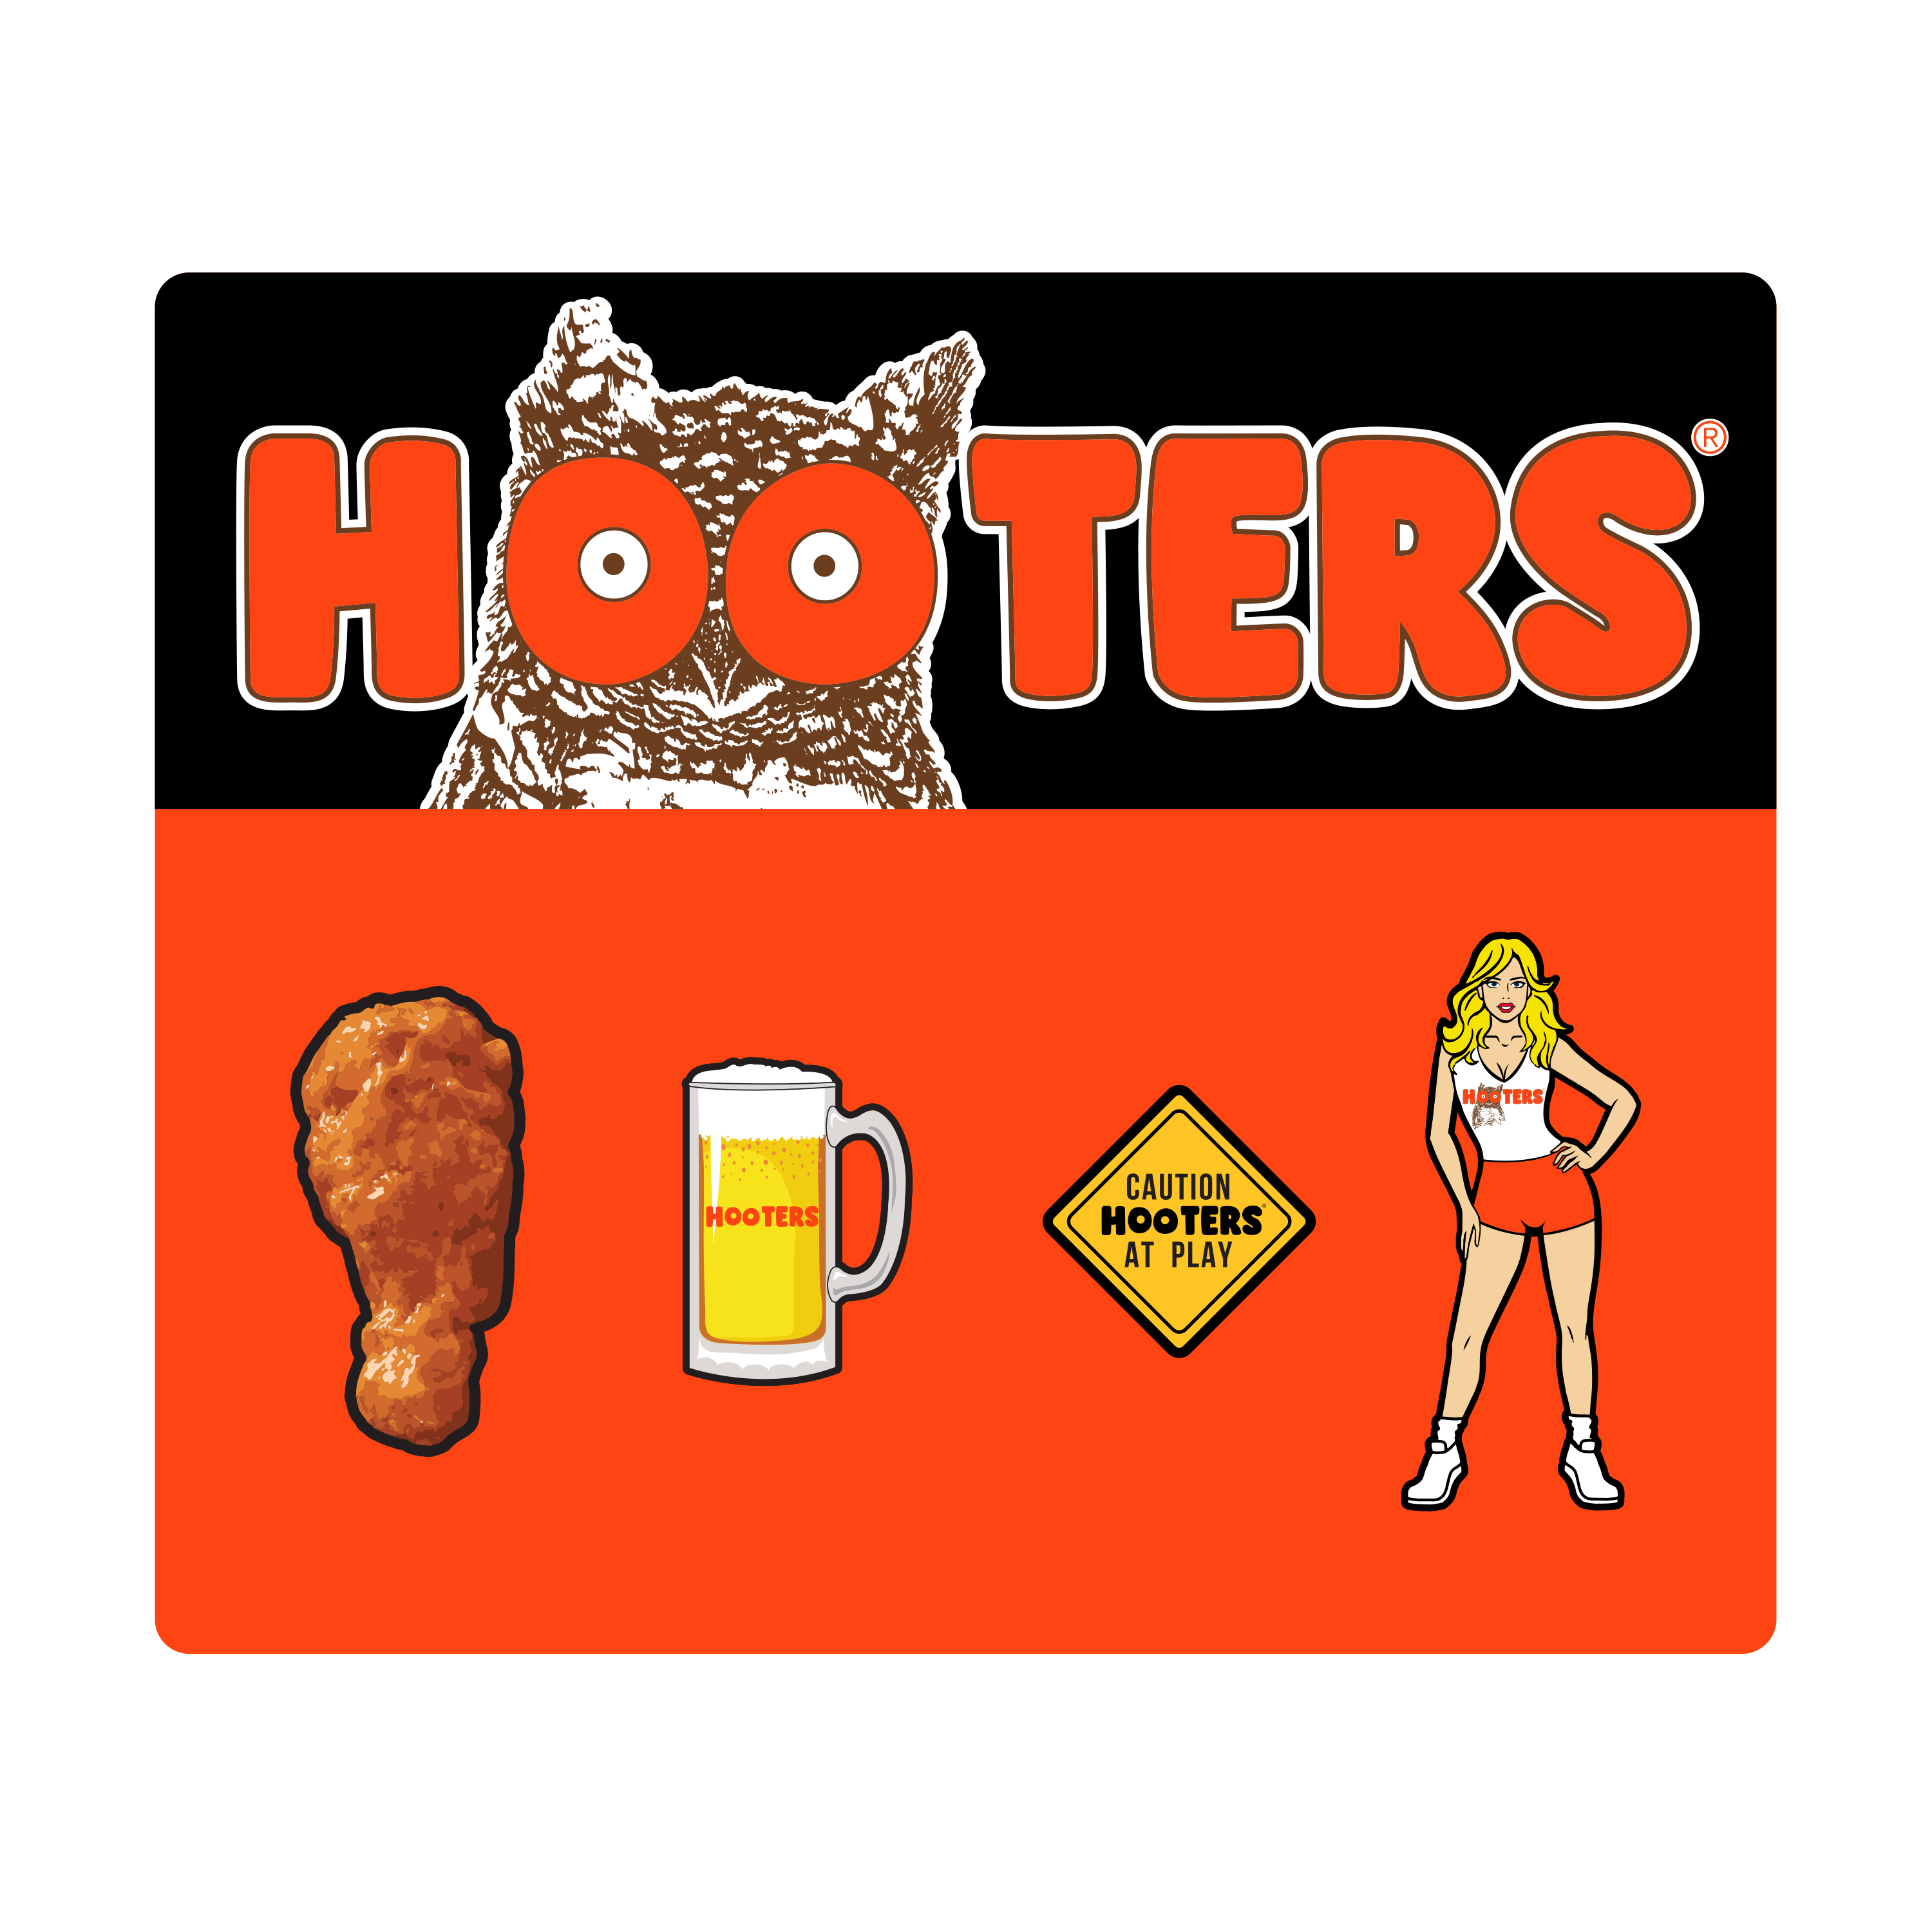 Pin on Hooter's chick's